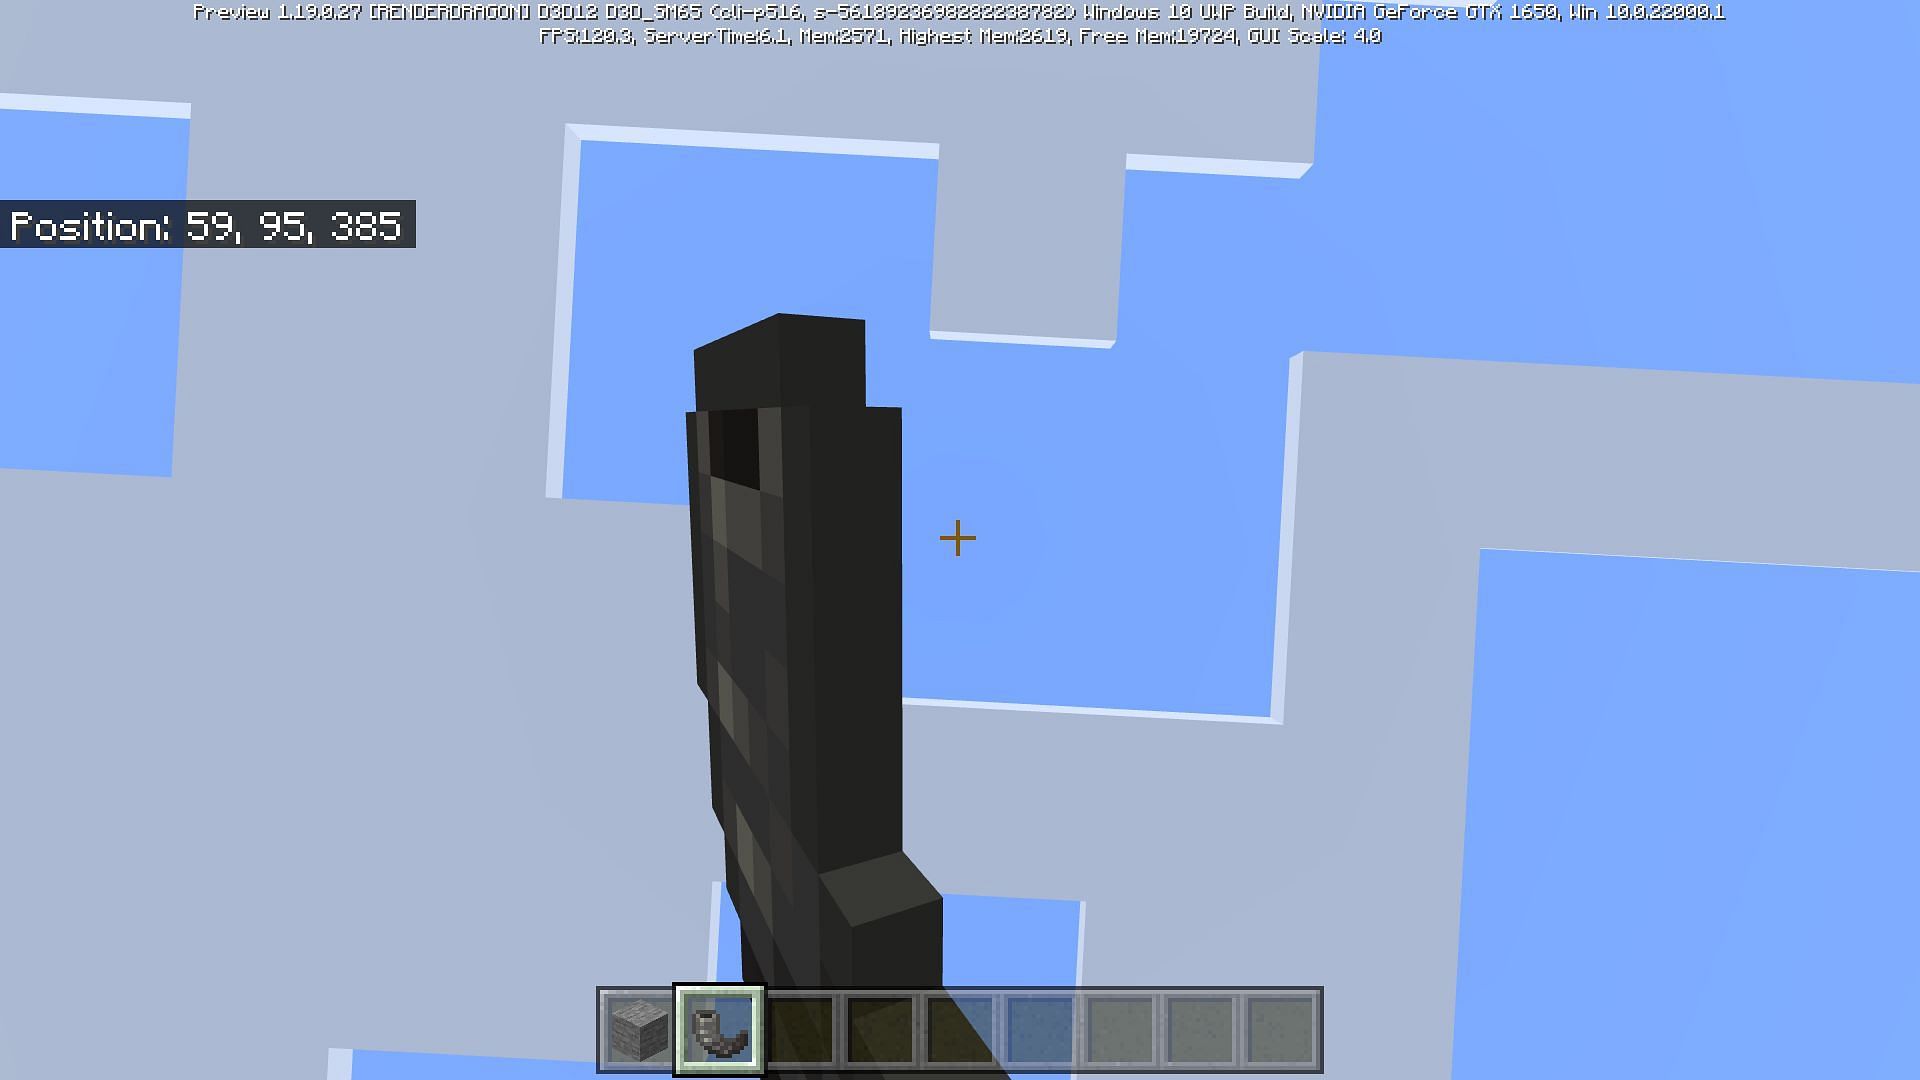 Blowing the goat horn while looking up (Image via Mojang)